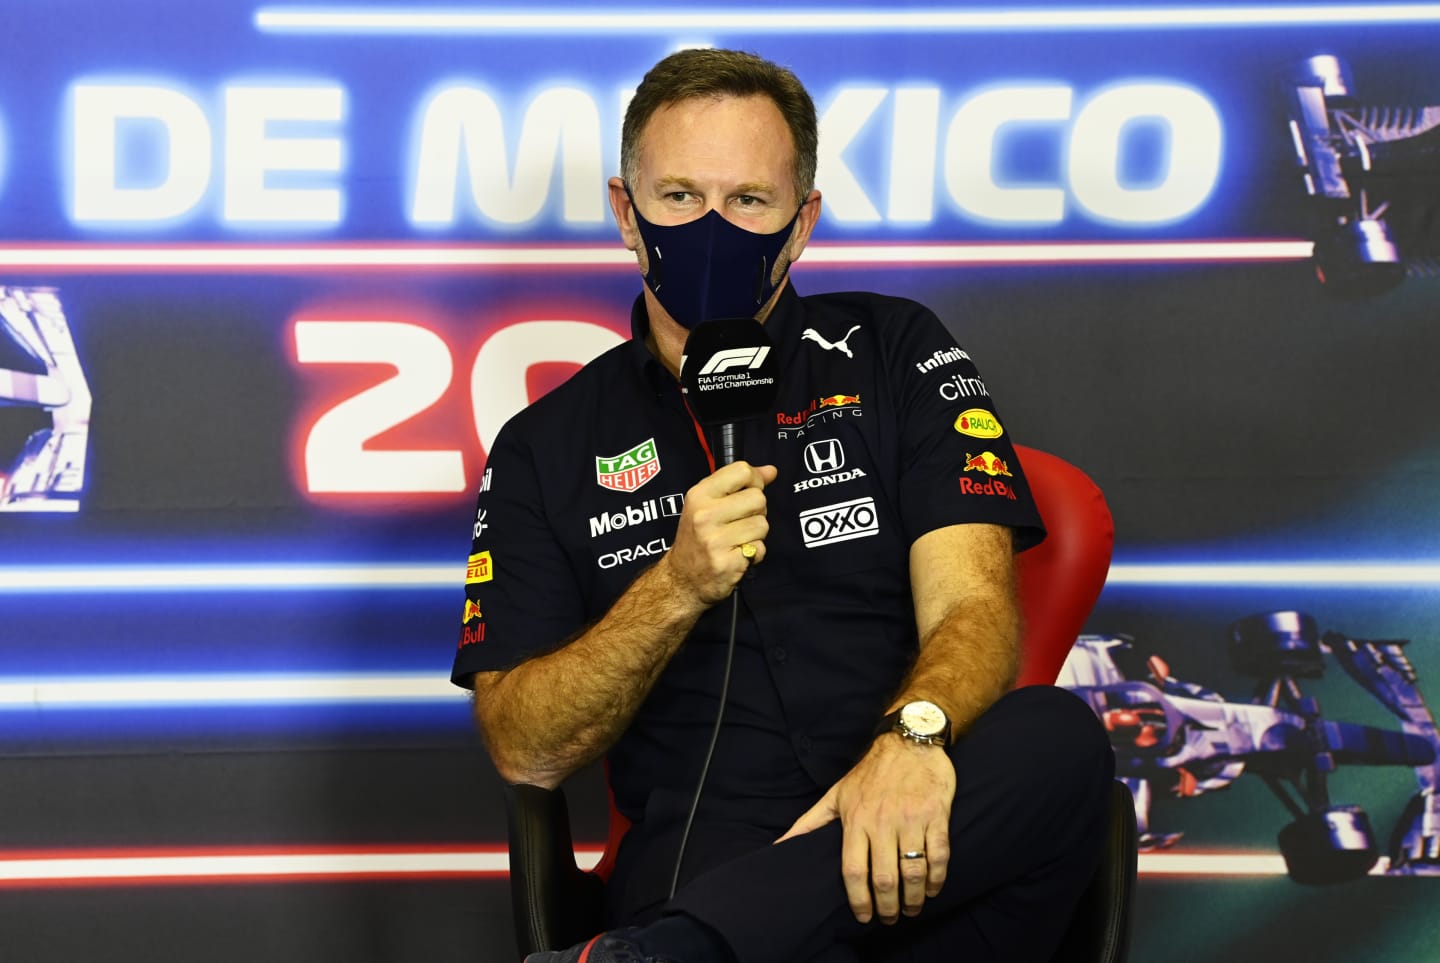 MEXICO CITY, MEXICO - NOVEMBER 05: Red Bull Racing Team Principal Christian Horner talks in the Team Principals Press Conference during practice ahead of the F1 Grand Prix of Mexico at Autodromo Hermanos Rodriguez on November 05, 2021 in Mexico City, Mexico. (Photo by Mark Sutton - Pool/Getty Images)